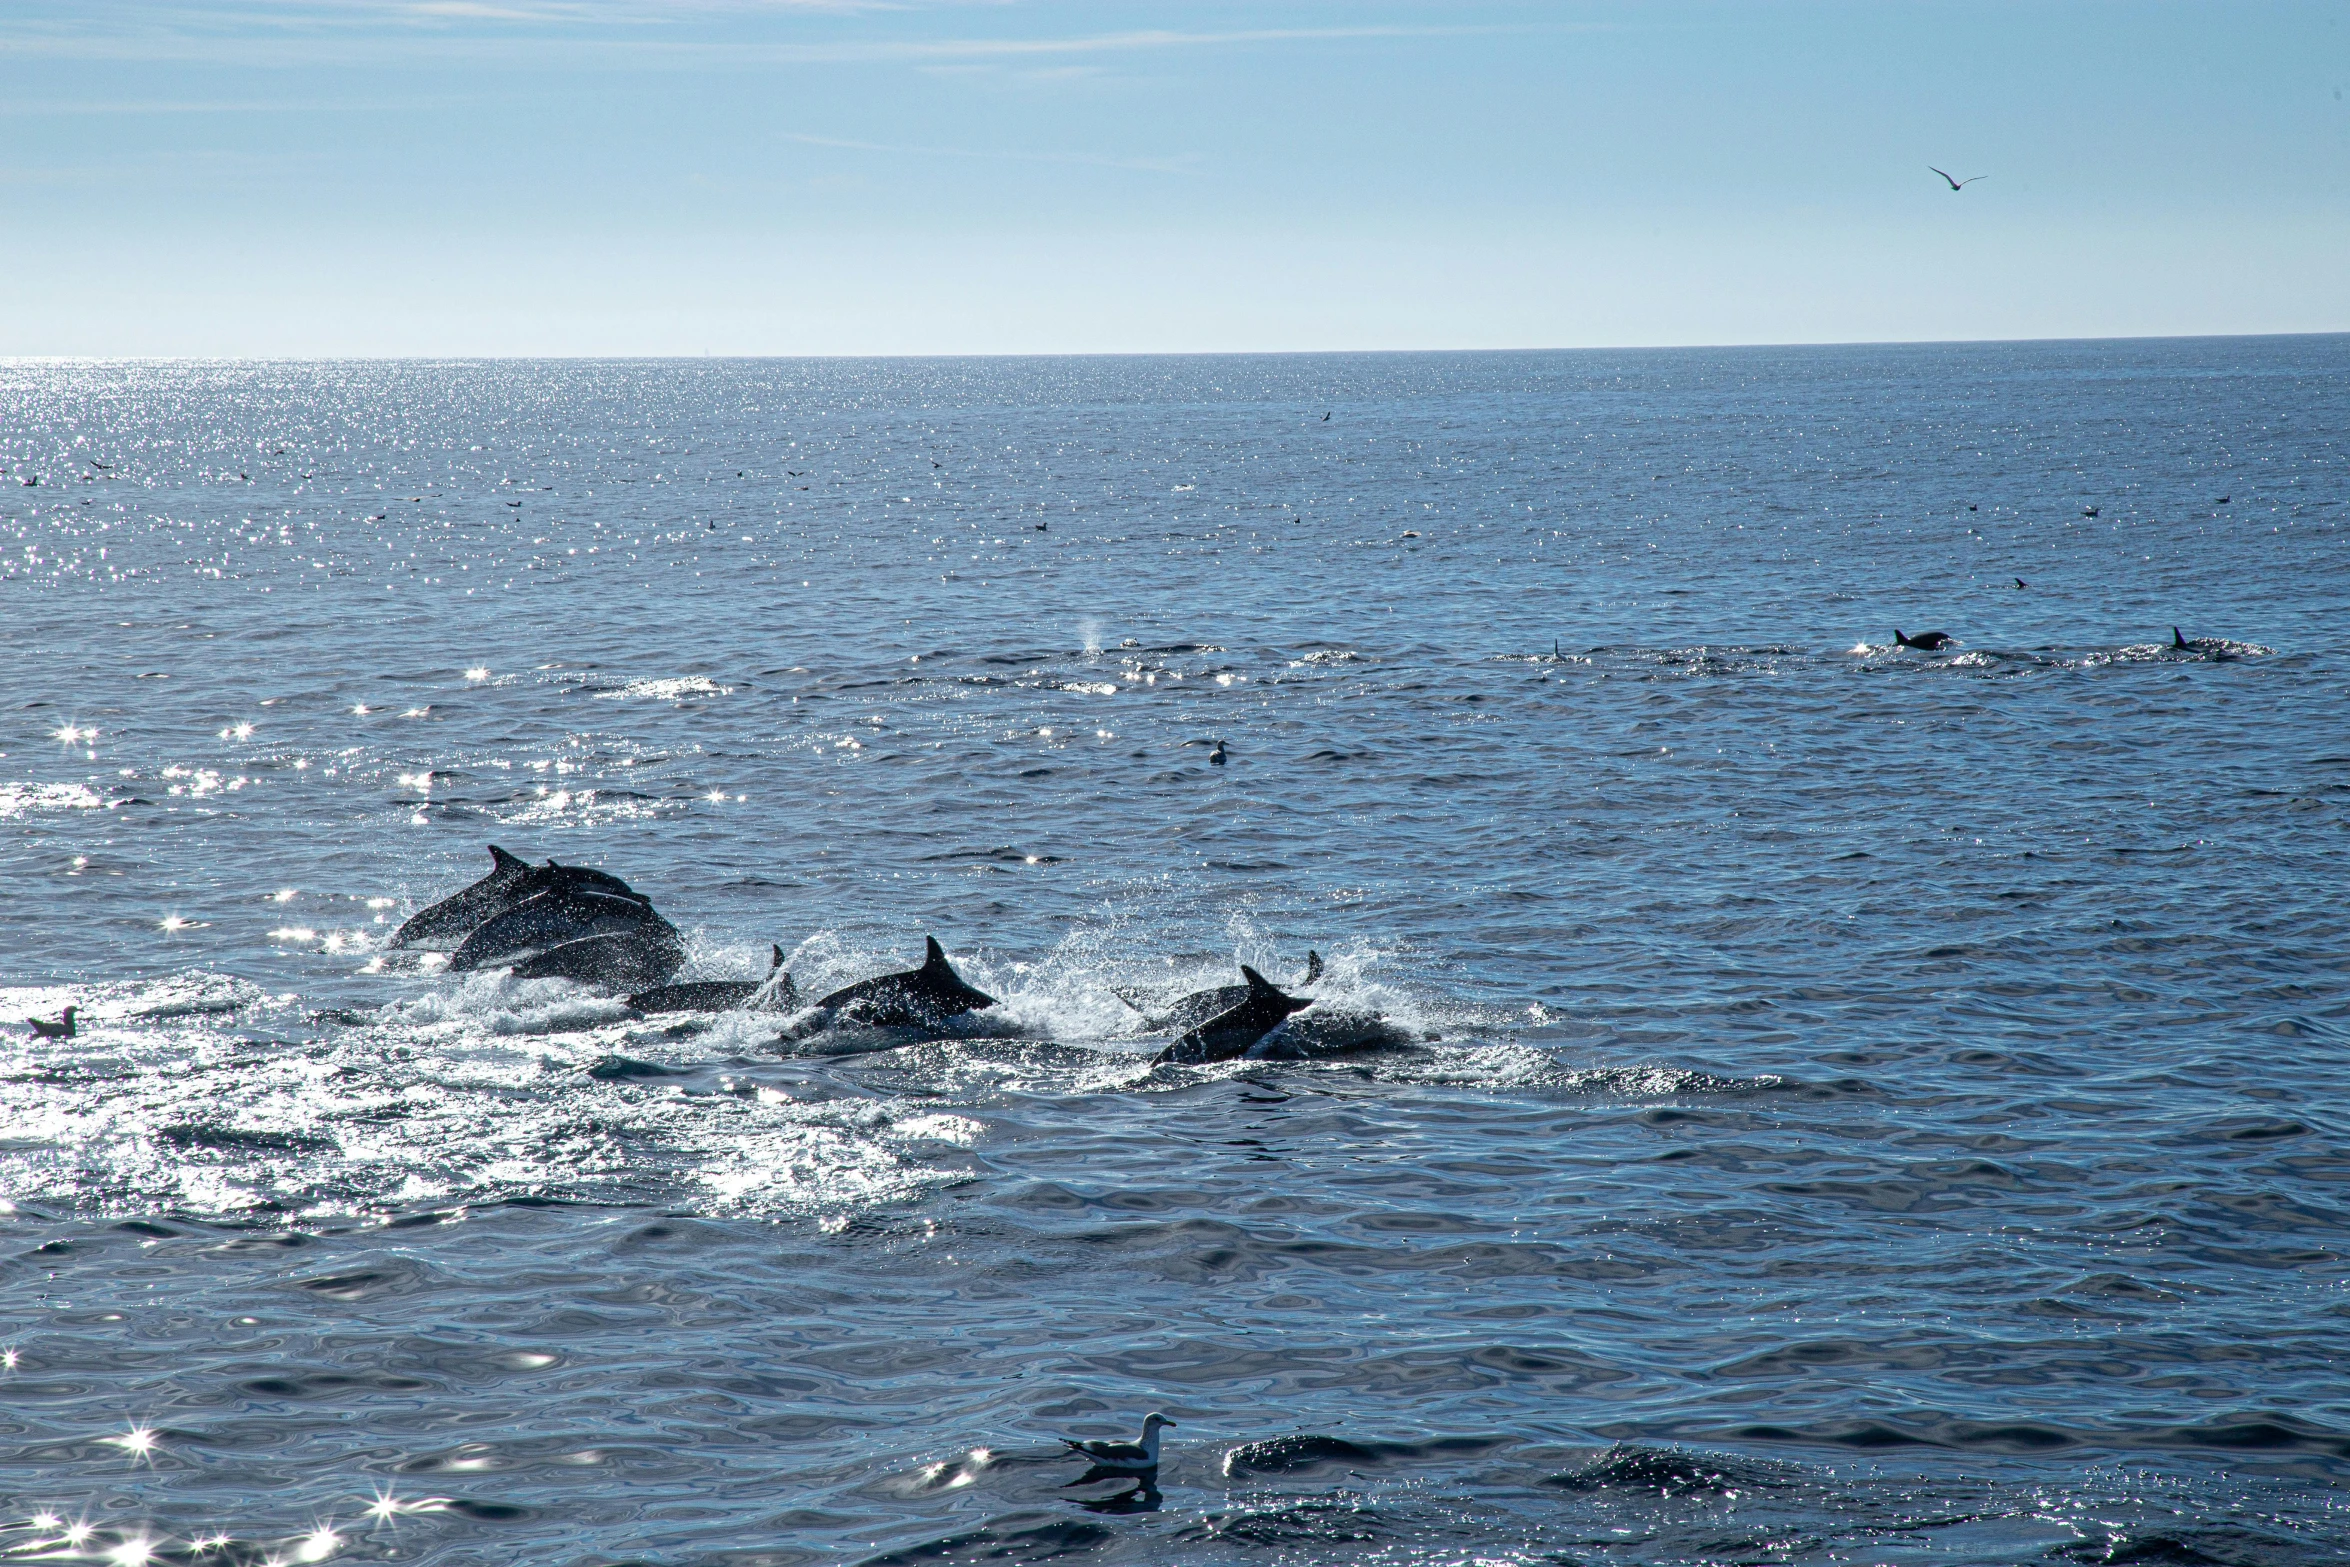 a group of dolphins swimming in the ocean, by Terese Nielsen, unsplash, 2 5 6 x 2 5 6 pixels, hammershøi, high quality photo, oceanside